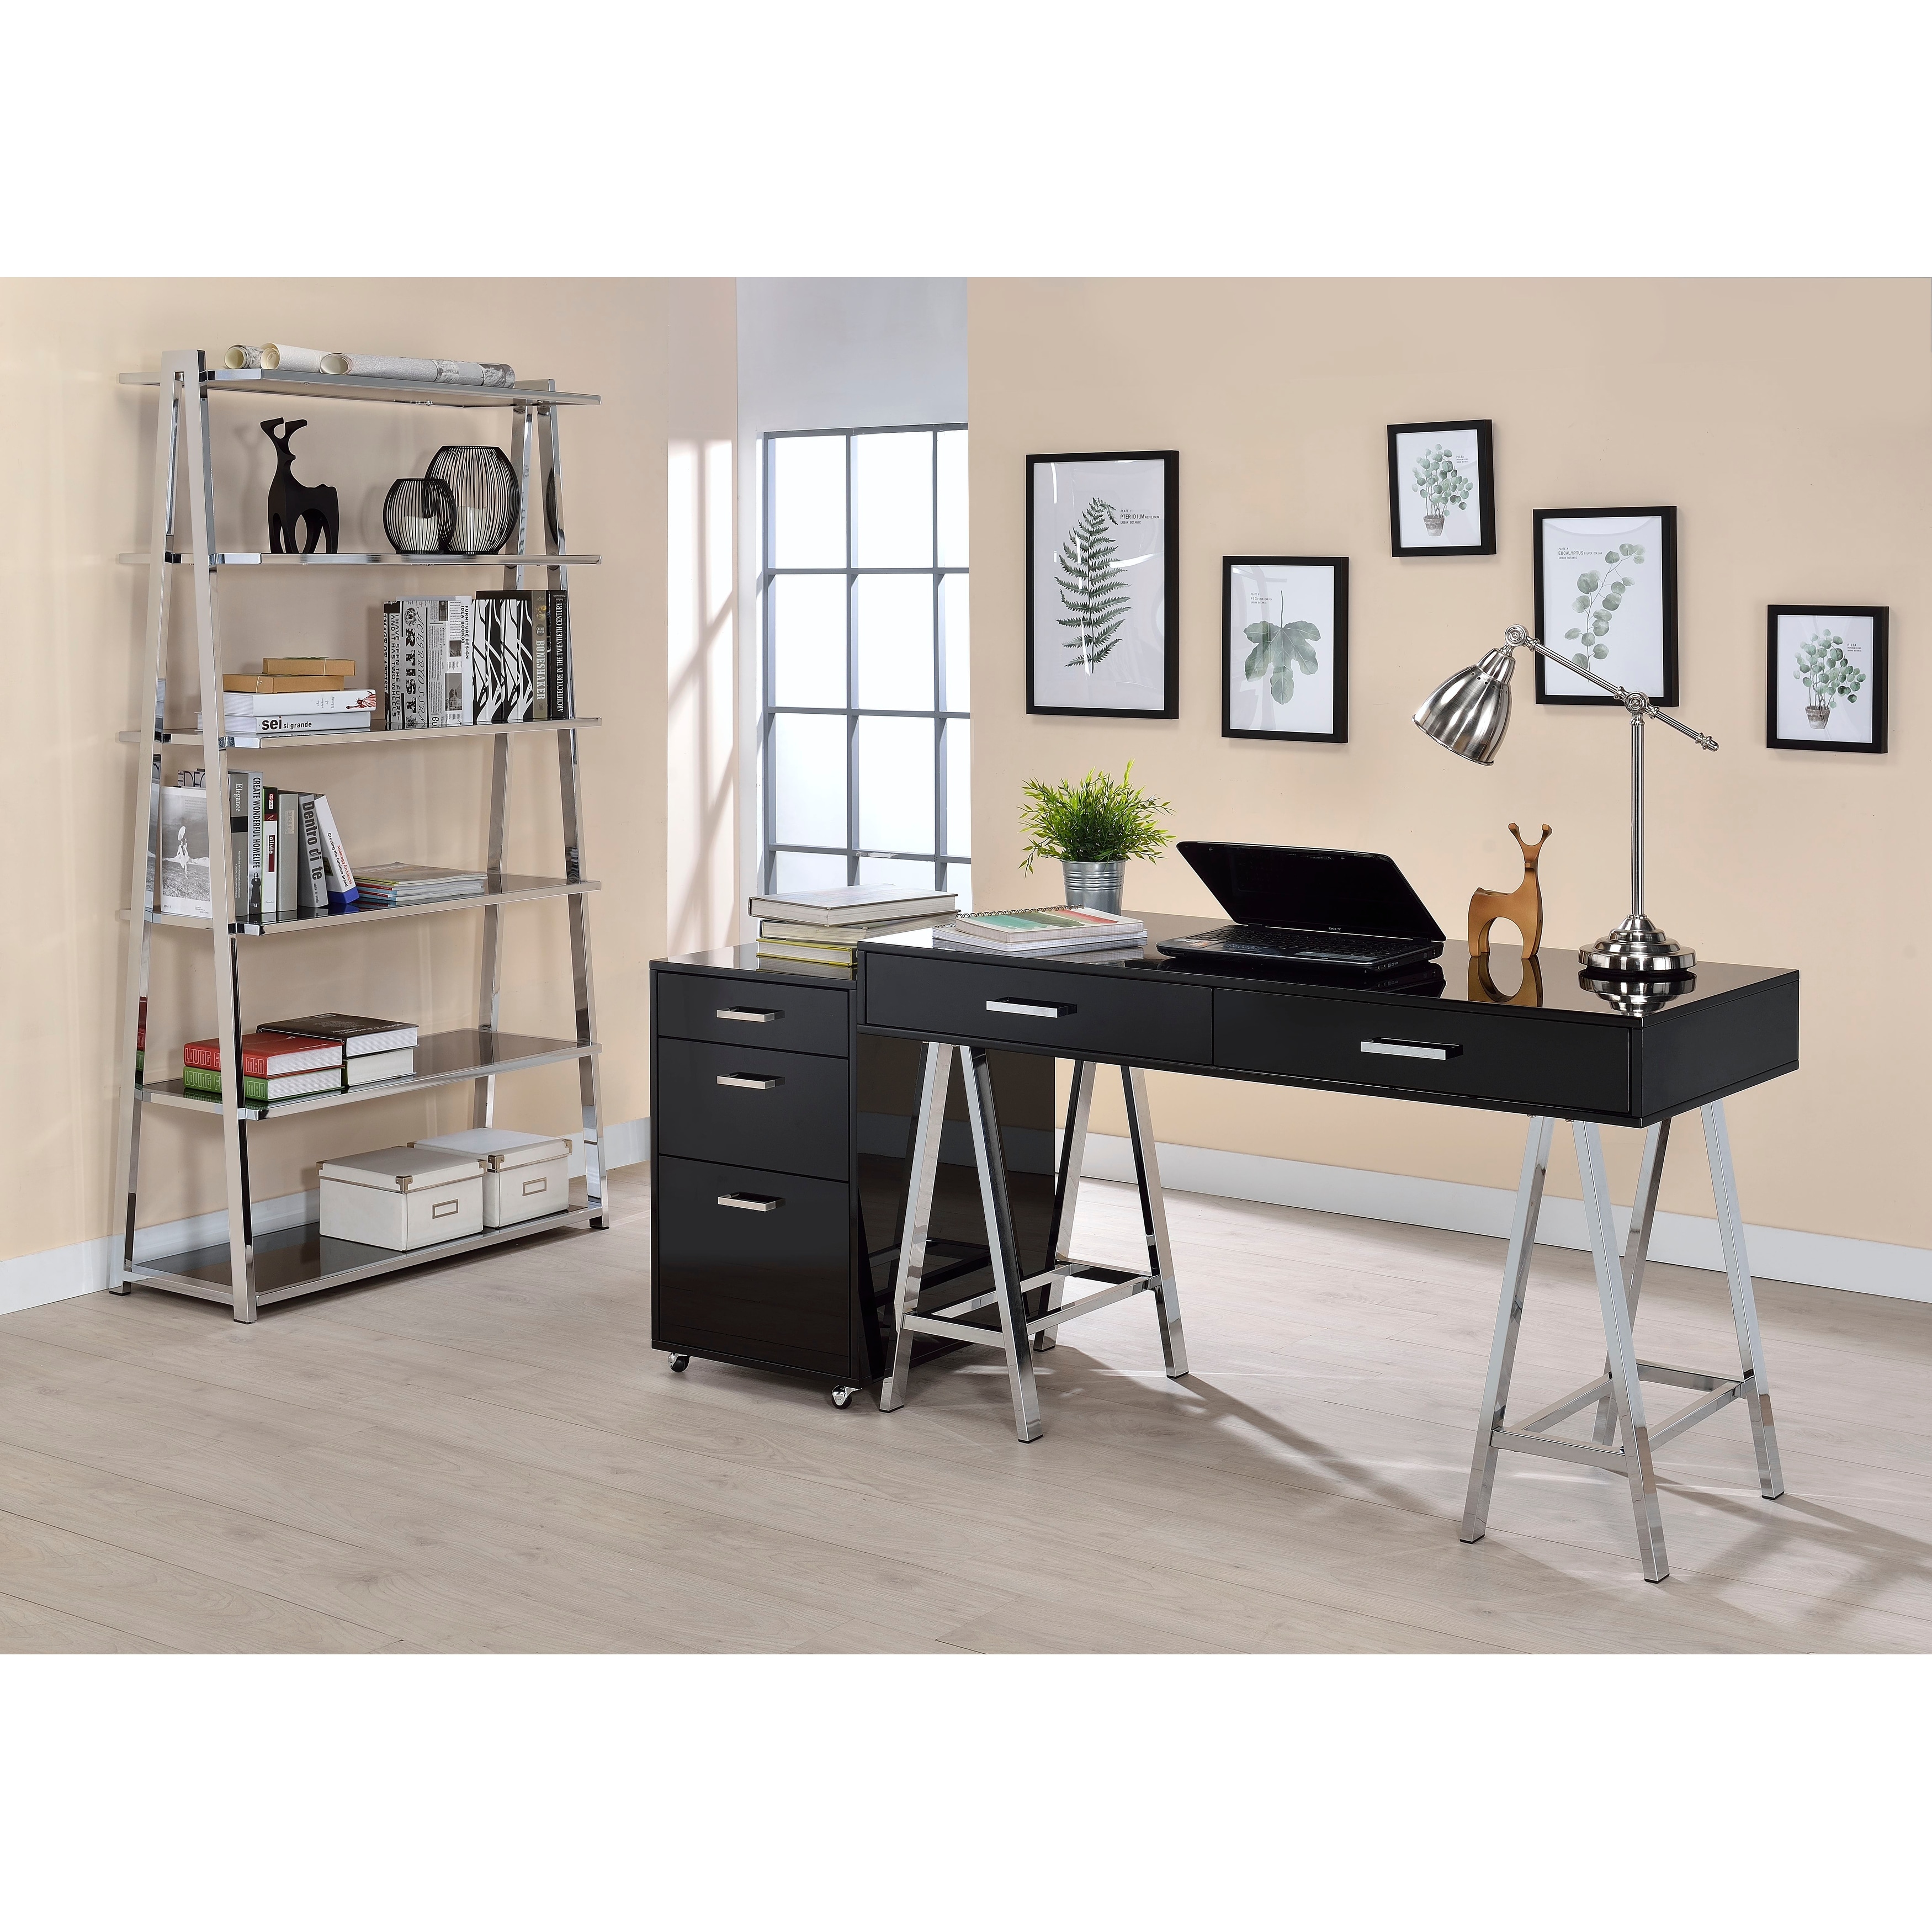 Black Wooden Filing Cabinet with Three Drawers and Wheels - Home and Office Organization